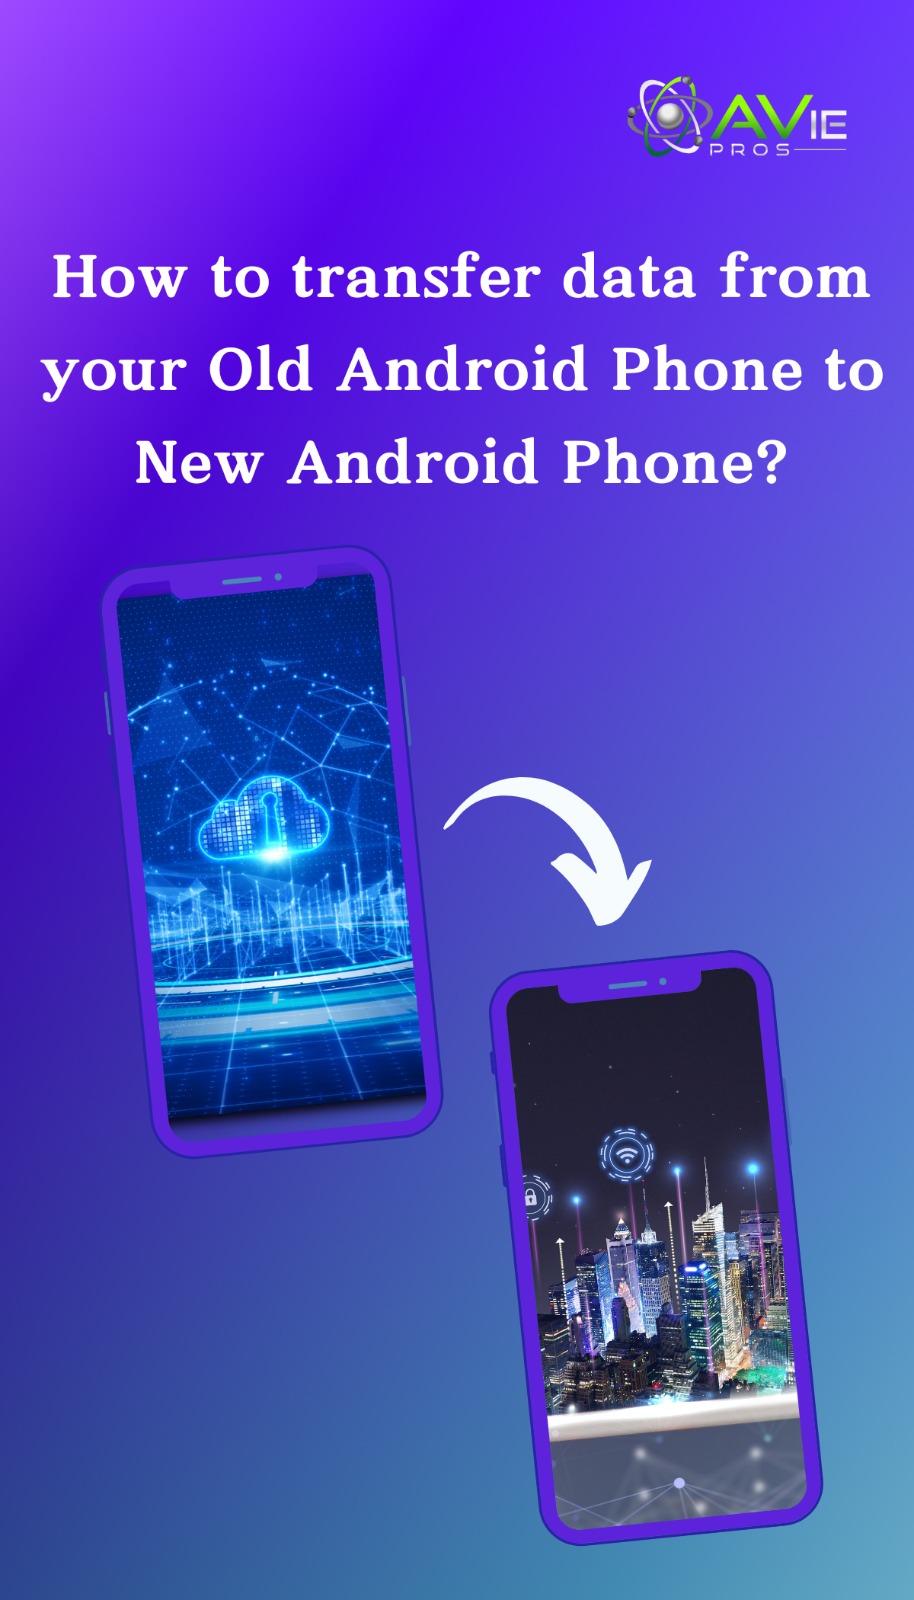 transfer data from your Old Android Phone to New Android Phone